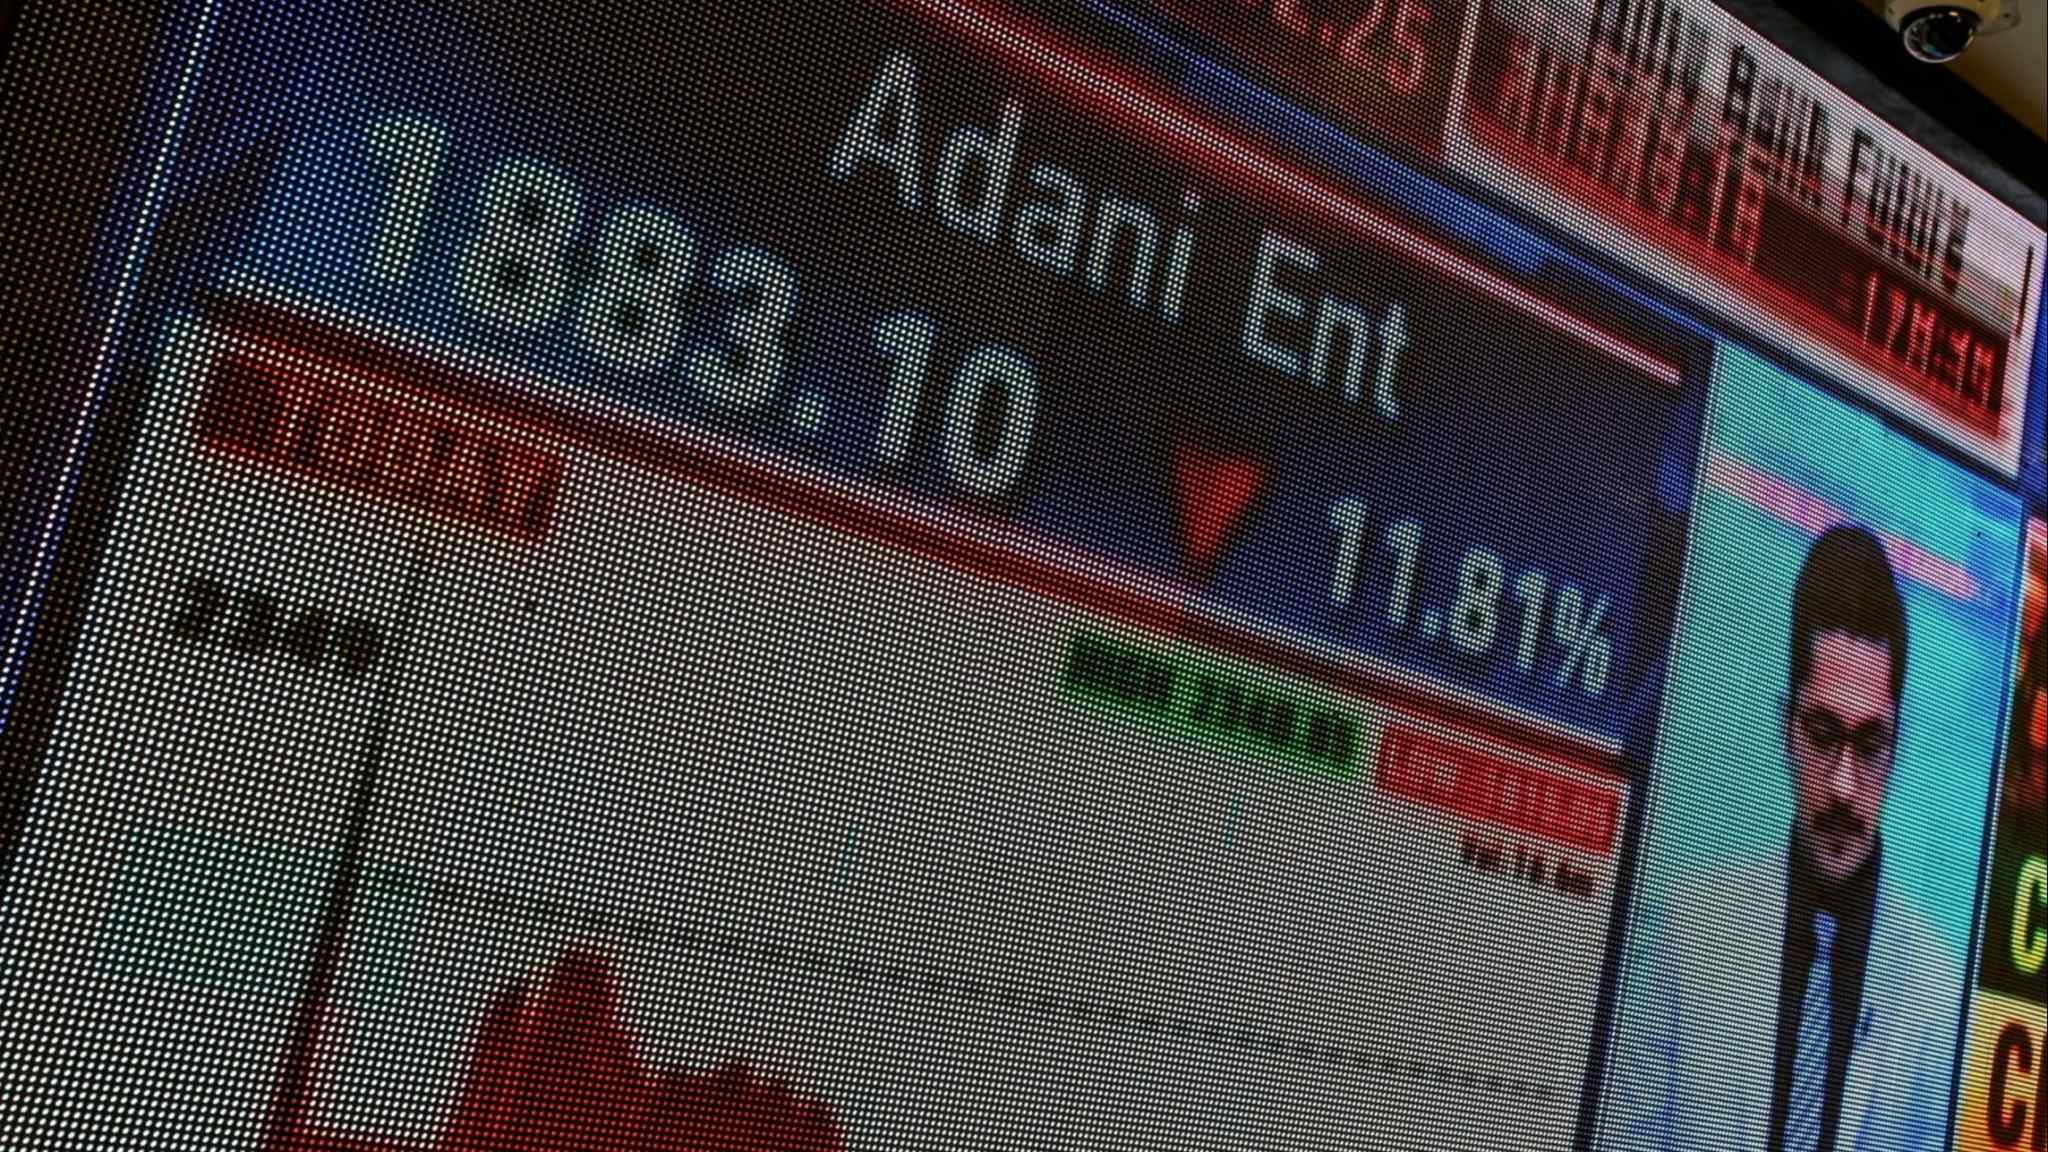 Indian authorities seek to calm investors after Adani sell-off